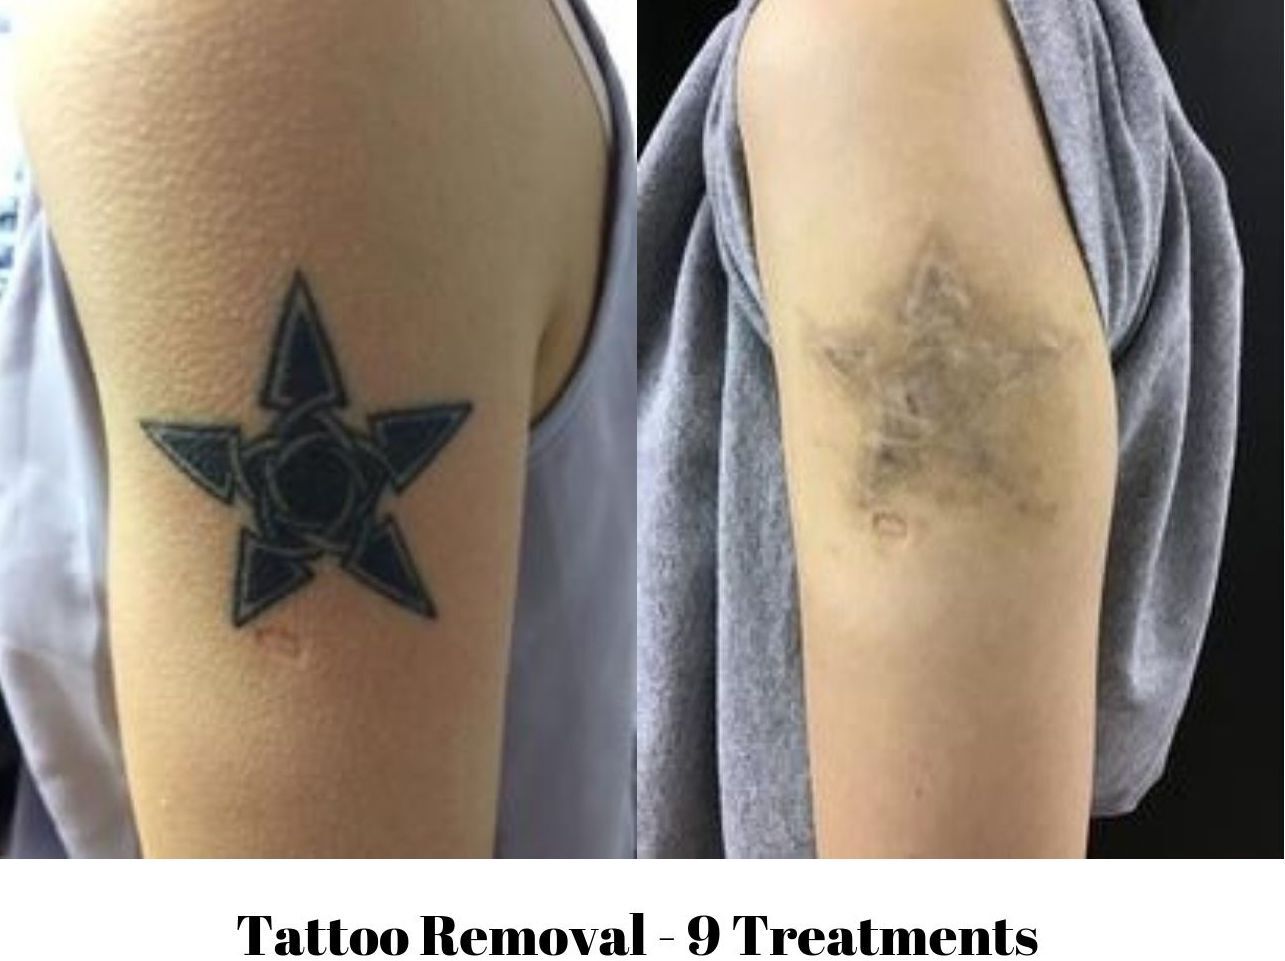 Tattoo removal using lasers means no scars but process still isnt easy   clevelandcom